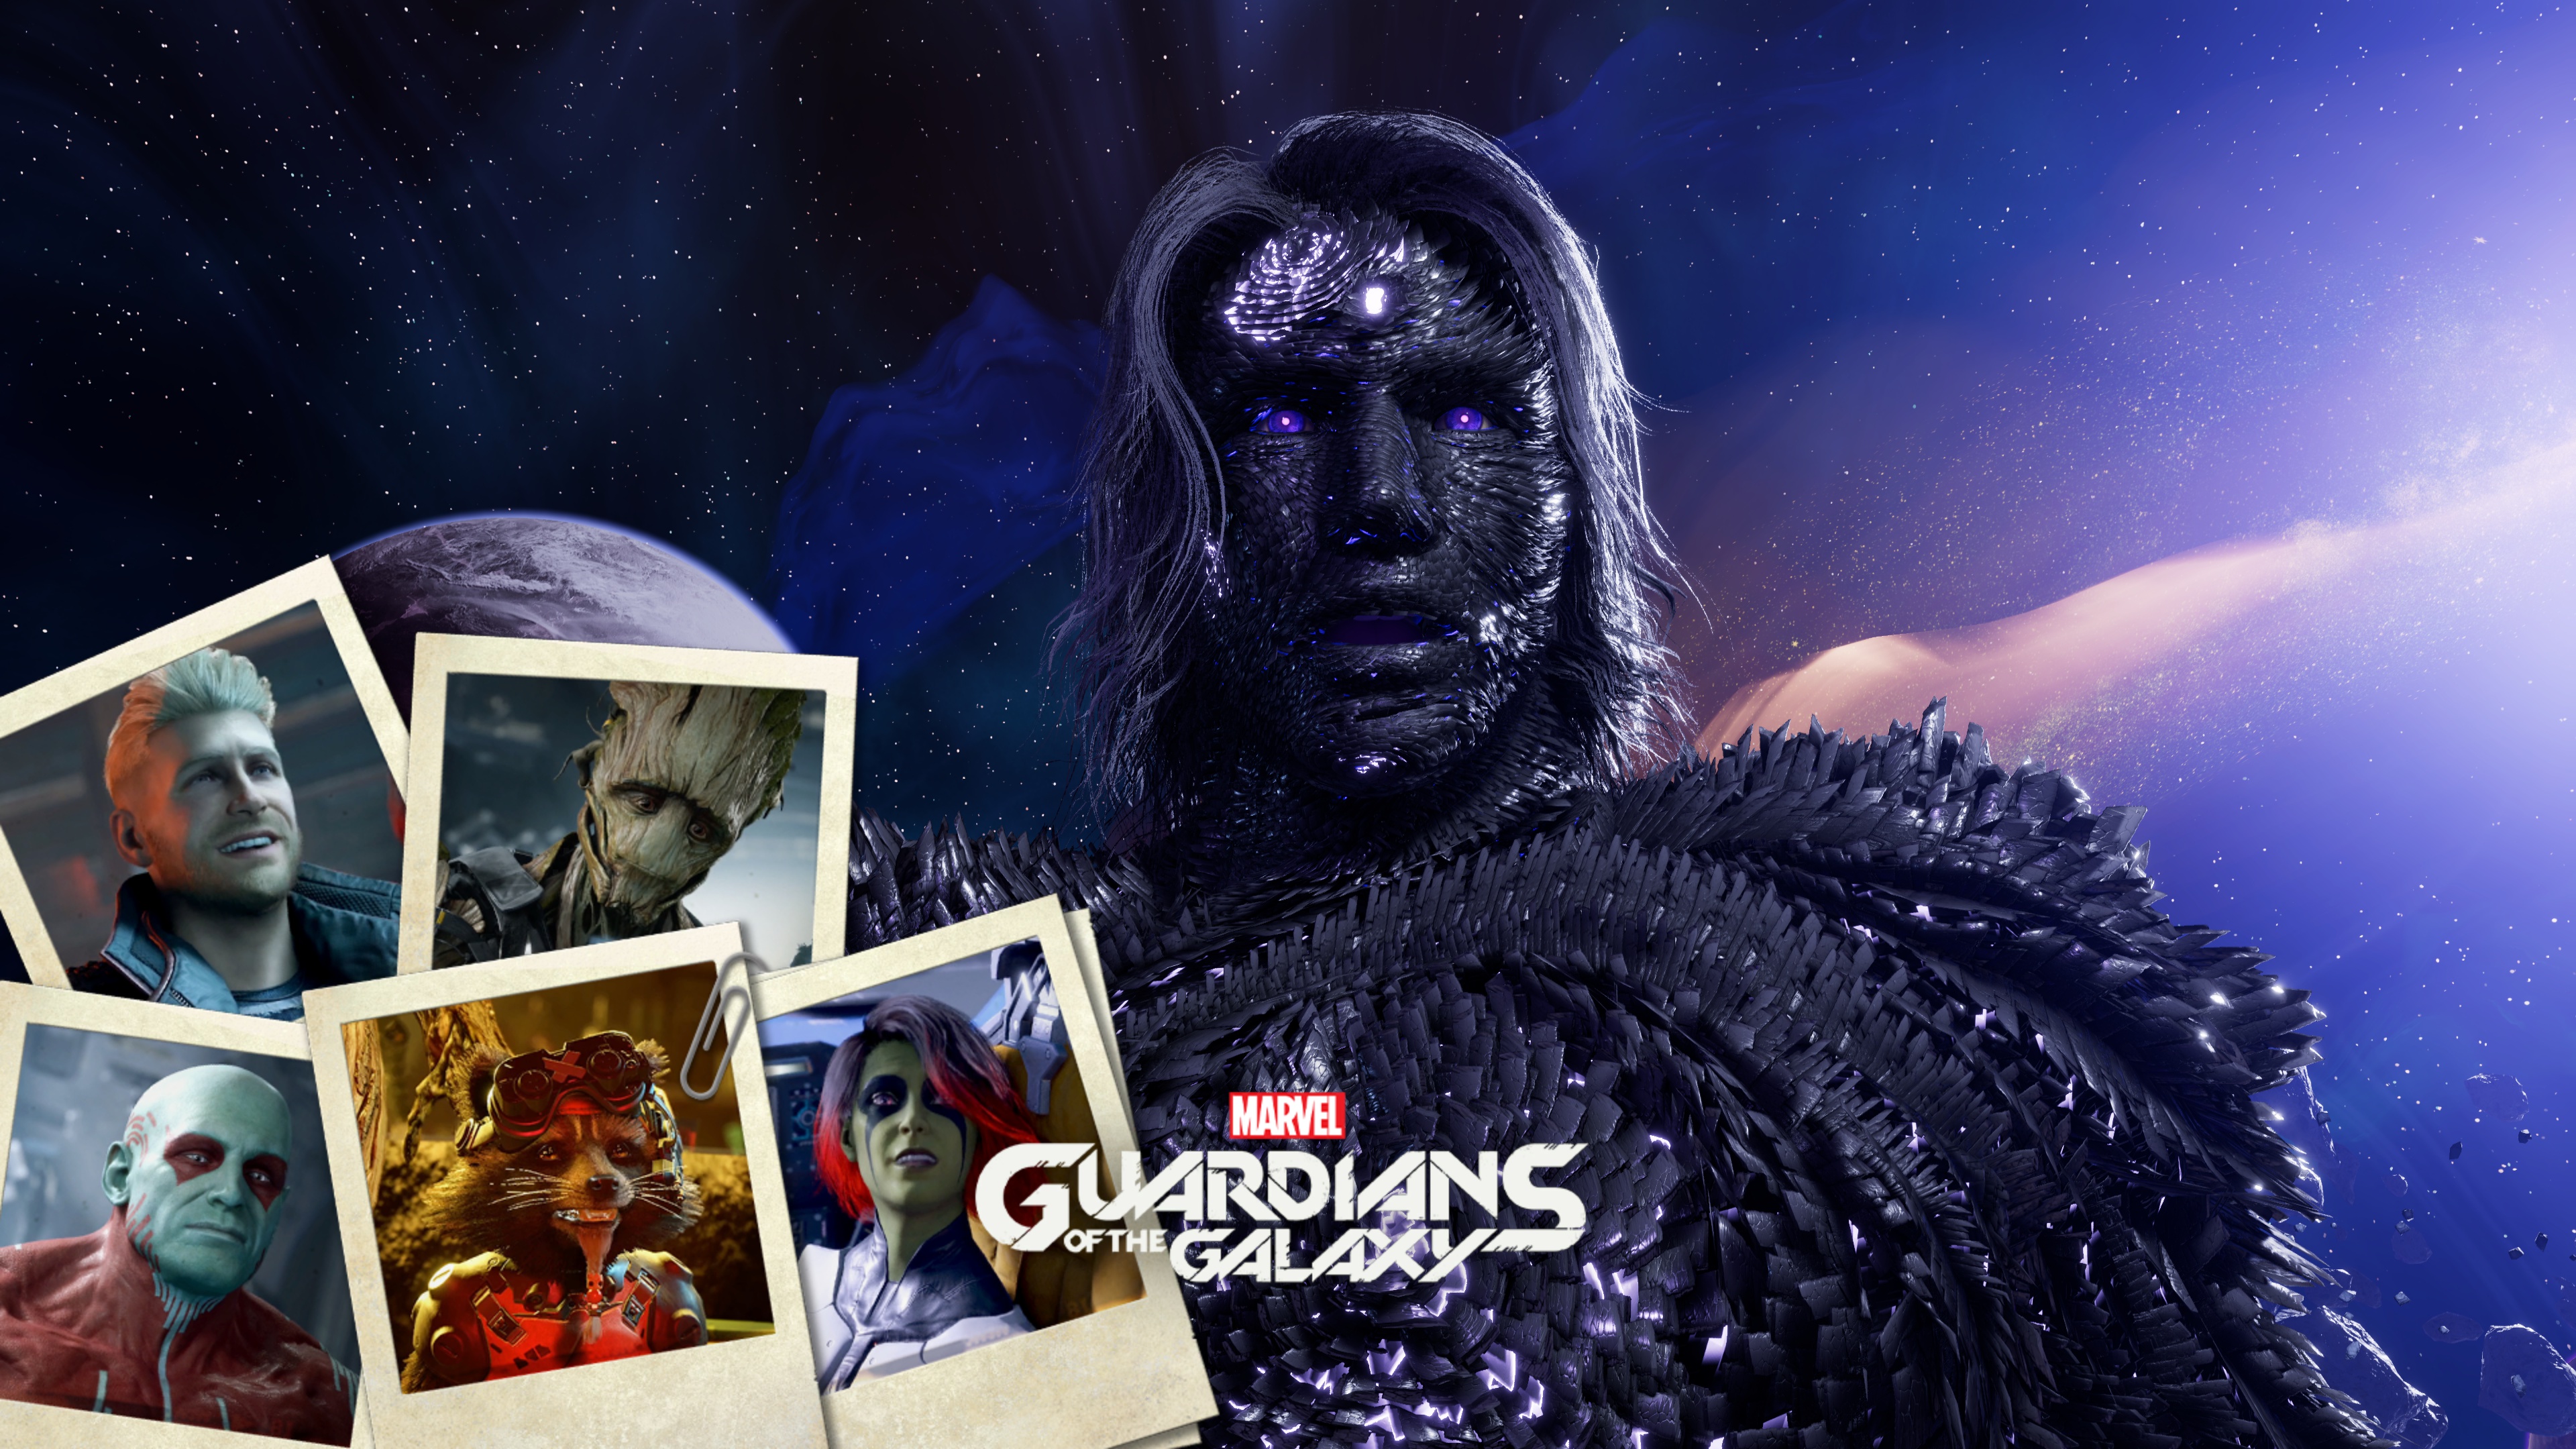 Guardians Of The Galaxy Video Game Art Gamora Rocket Raccoon Groot Drax The Destroyer Star Lord 3840x2160